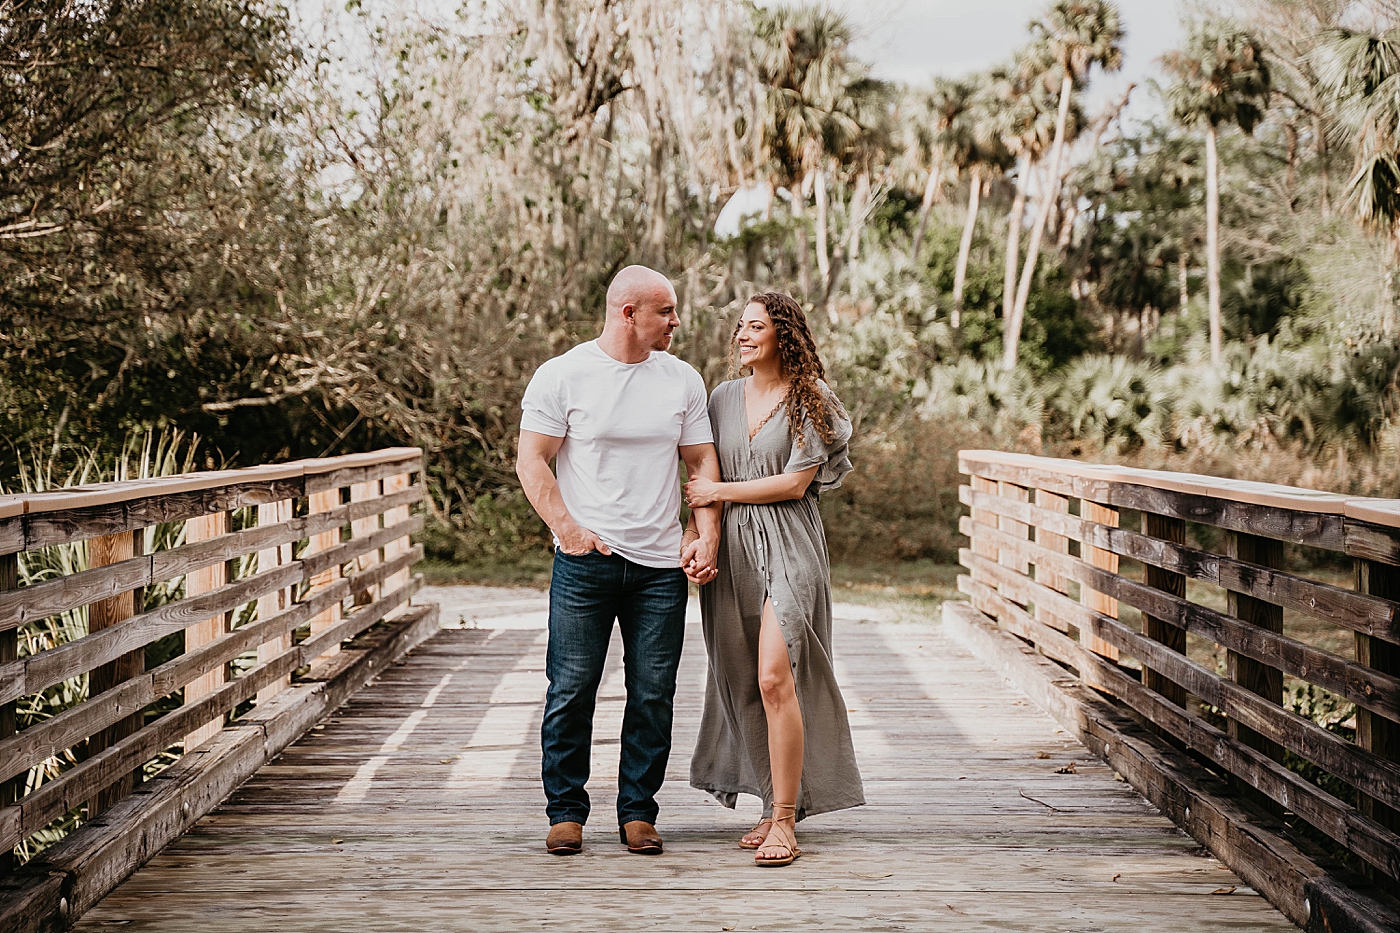 Couple walking together with woman holding man's arm Romantic Riverbend Park Engagement Photography captured by South Florida Photographer Krystal Capone Photography